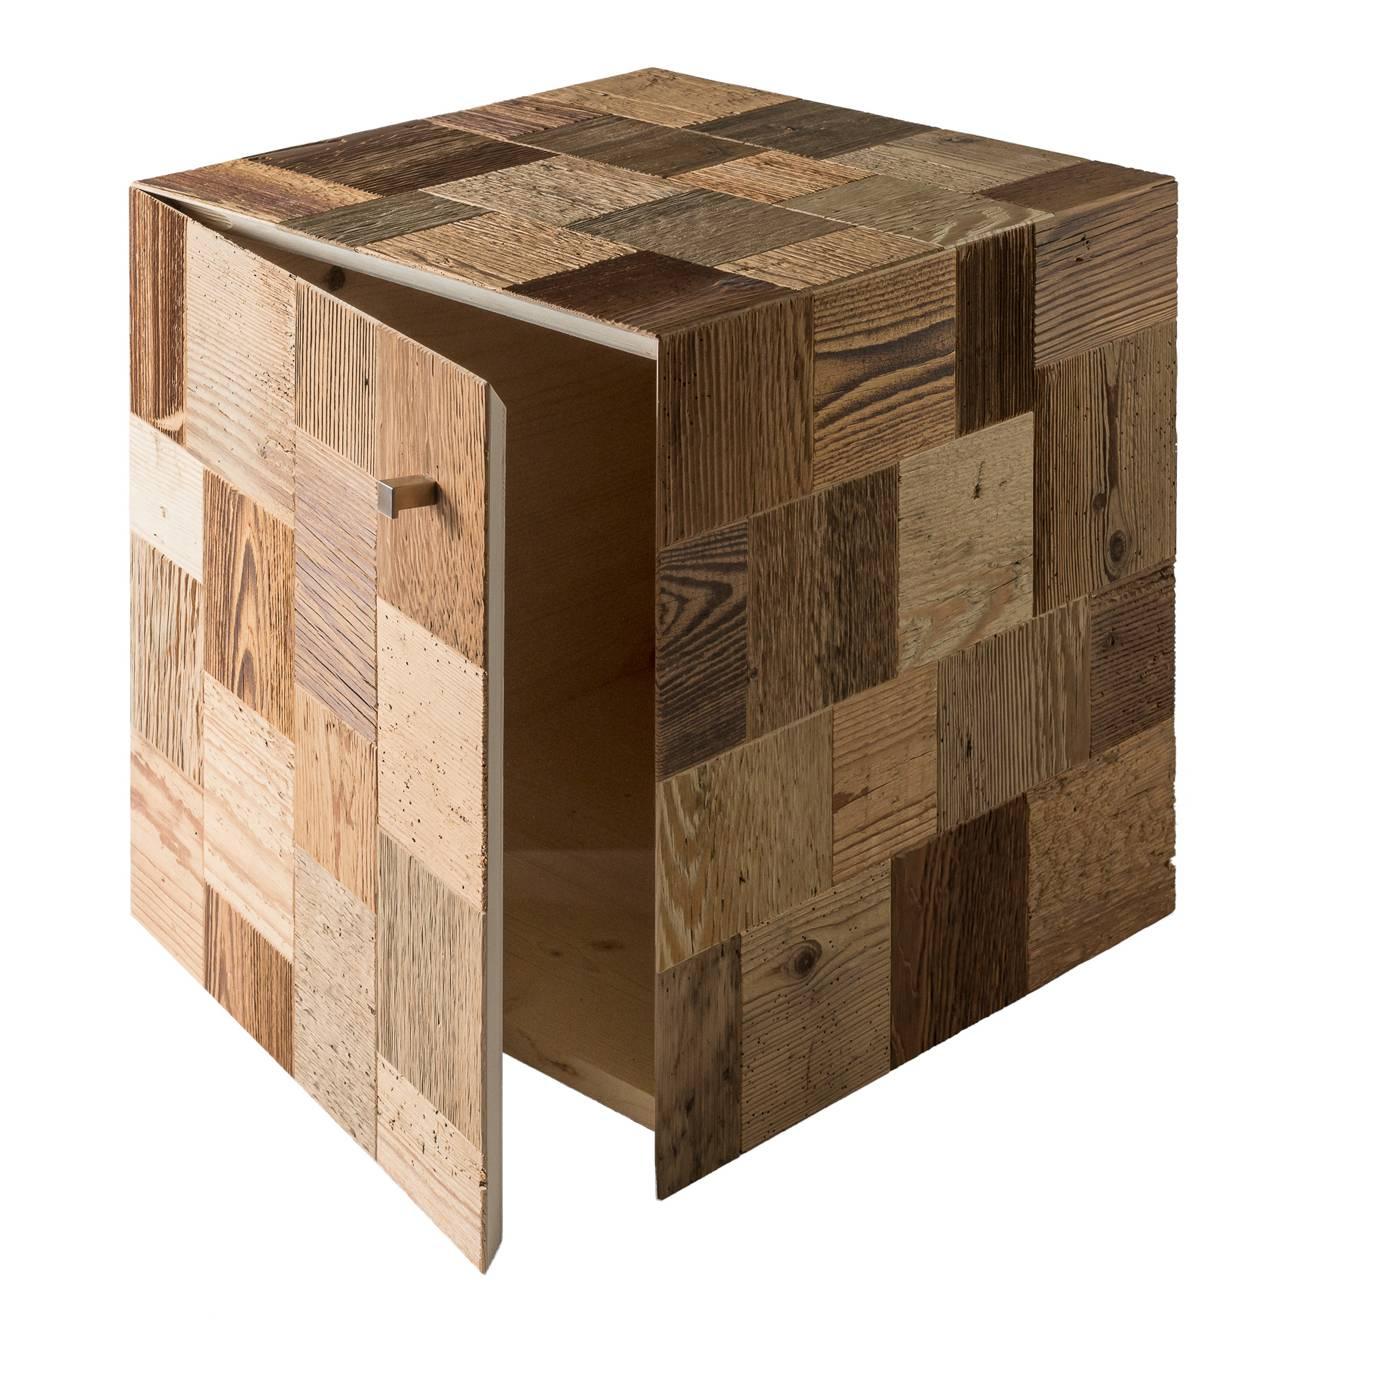 Functional design at its utmost expression, this cubic piece of furniture performs a Dual function as an accent piece and storage cabinet. The wood entirely handcrafted from recovered and restored planks of old barns, whose colors result from